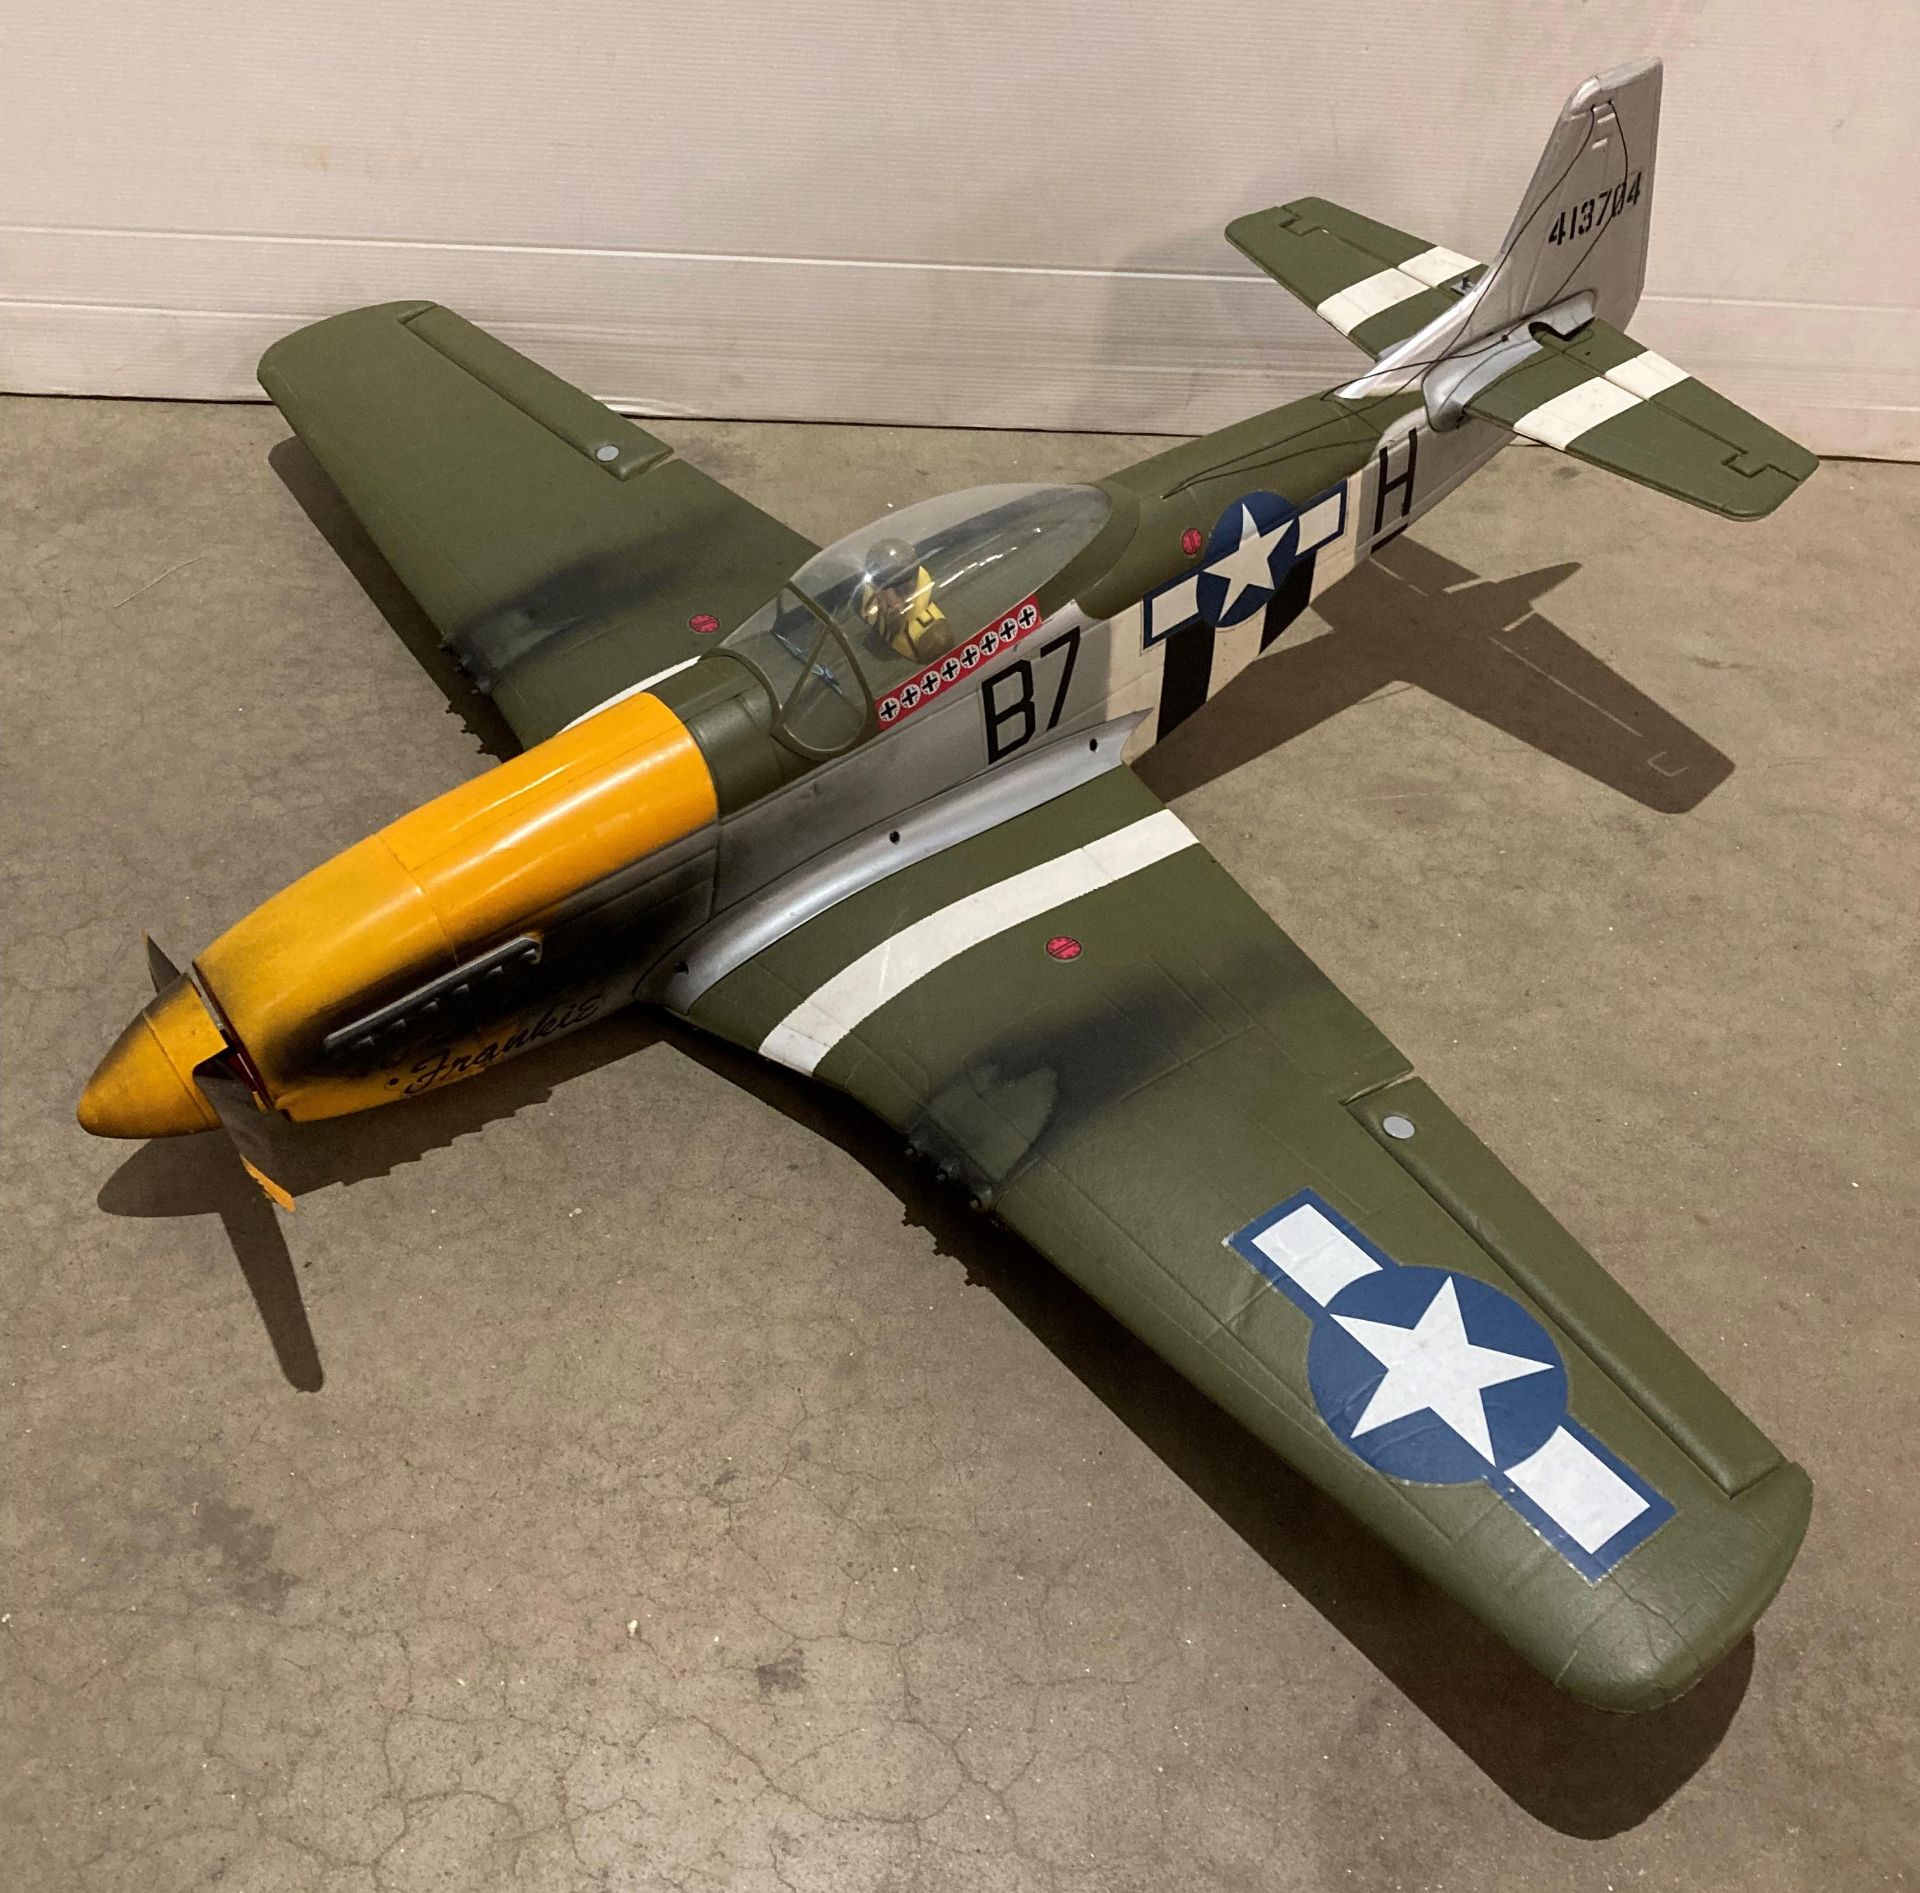 North America P-51 Mustang electric remote controlled model aeroplane (no controller) size 86cm L x - Image 2 of 3